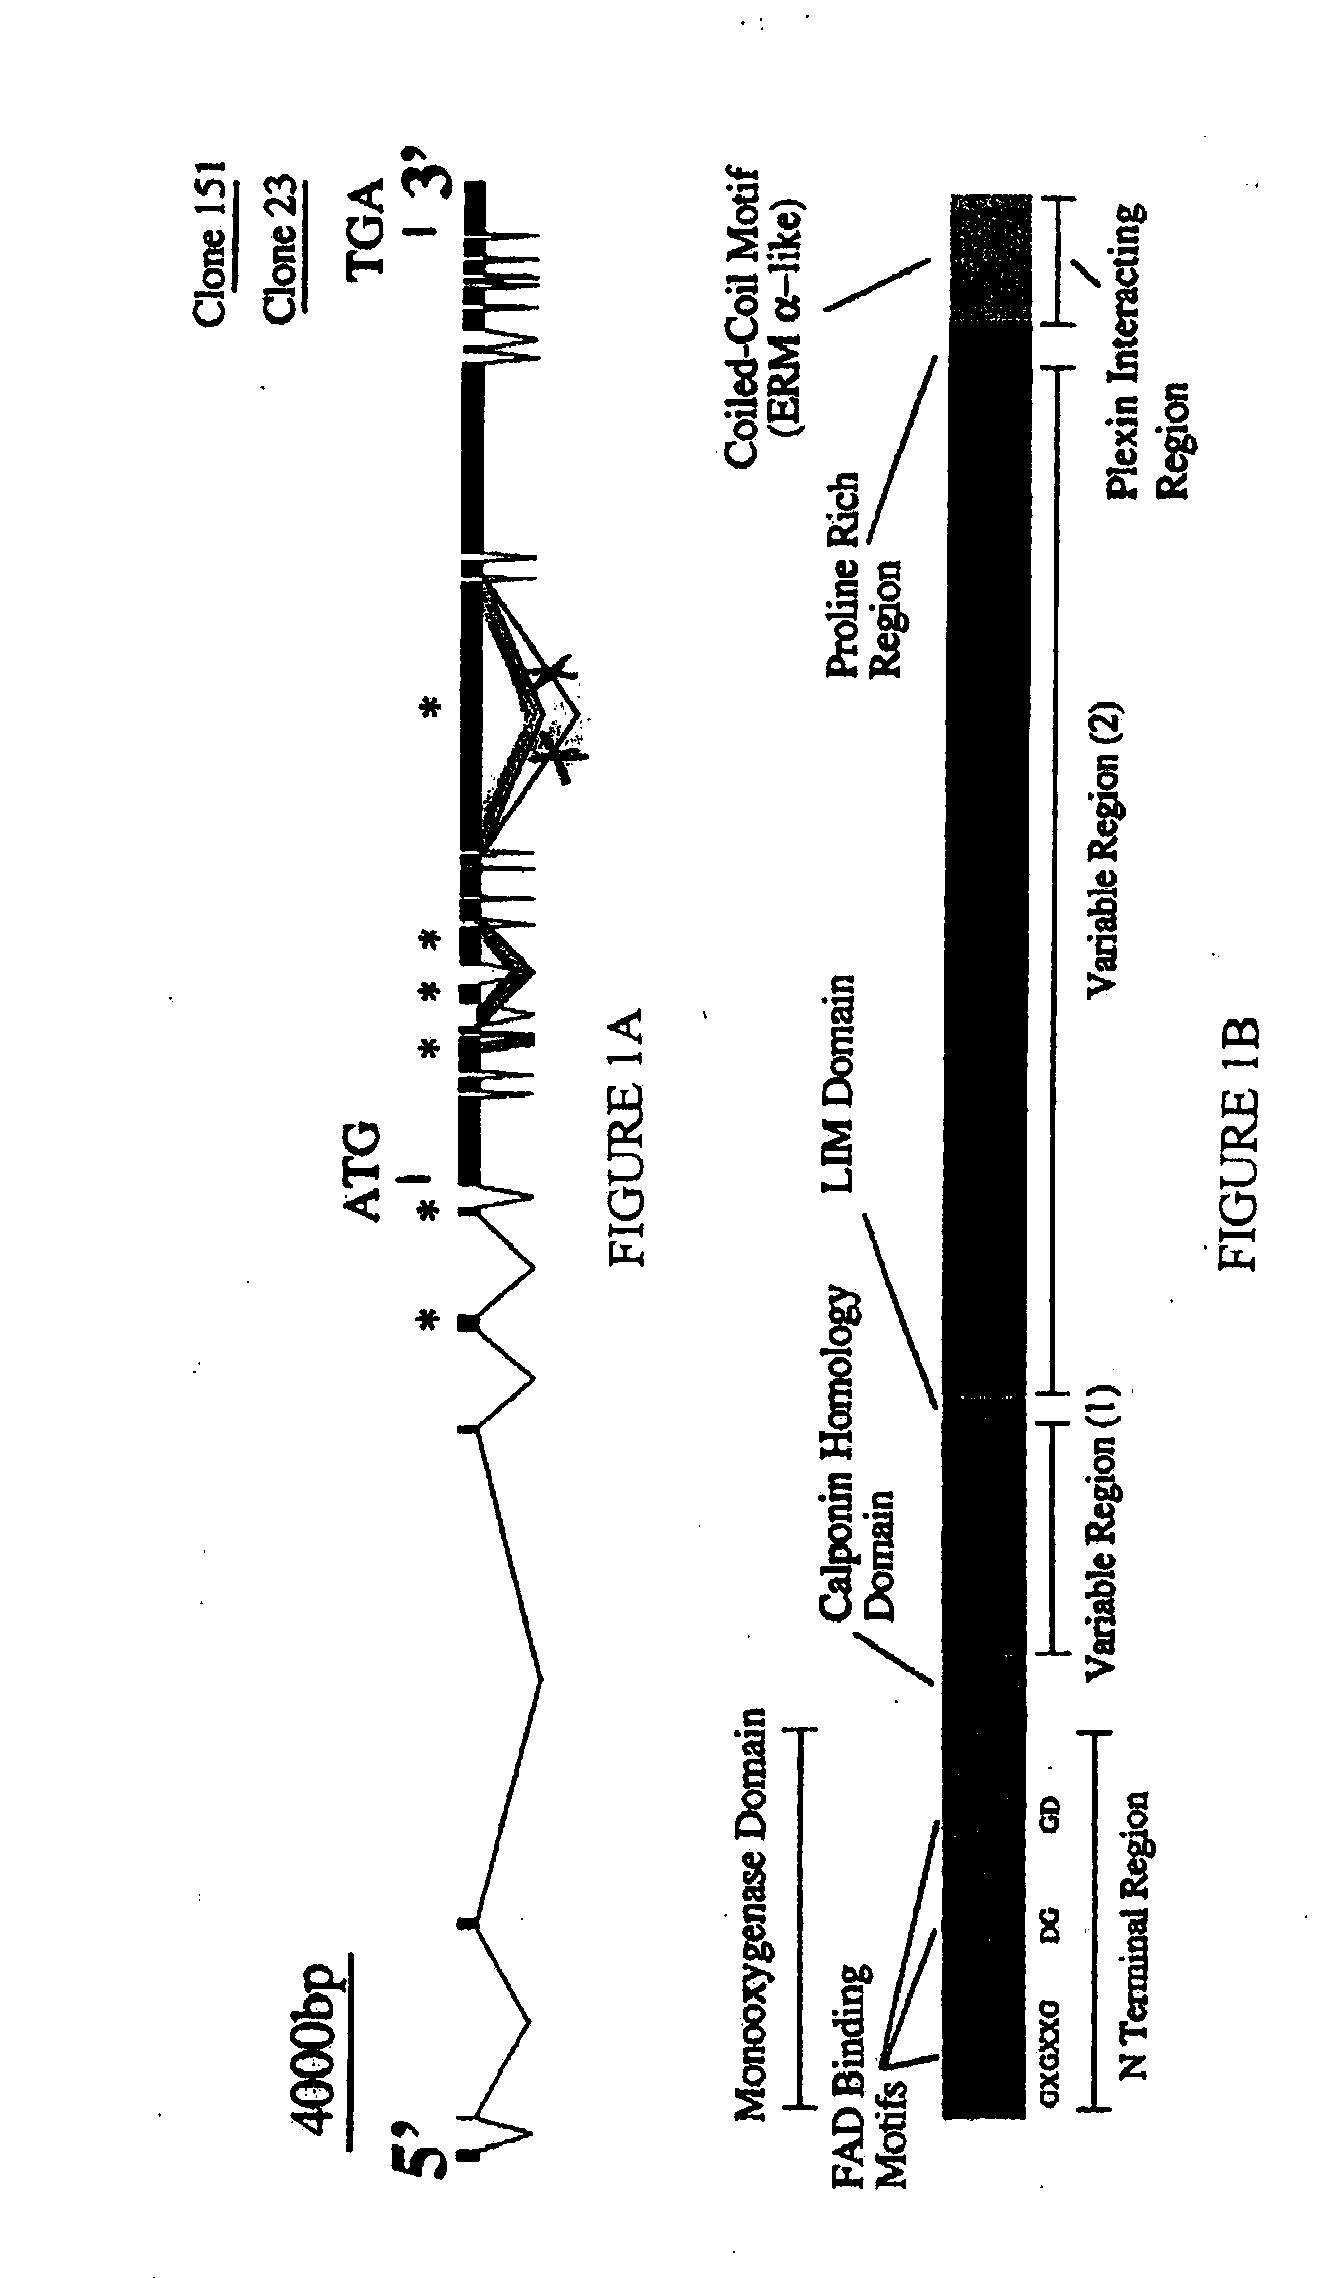 Molecules interacting with casl (MICAL) polynucleotides, polypeptides, and methods of using the same